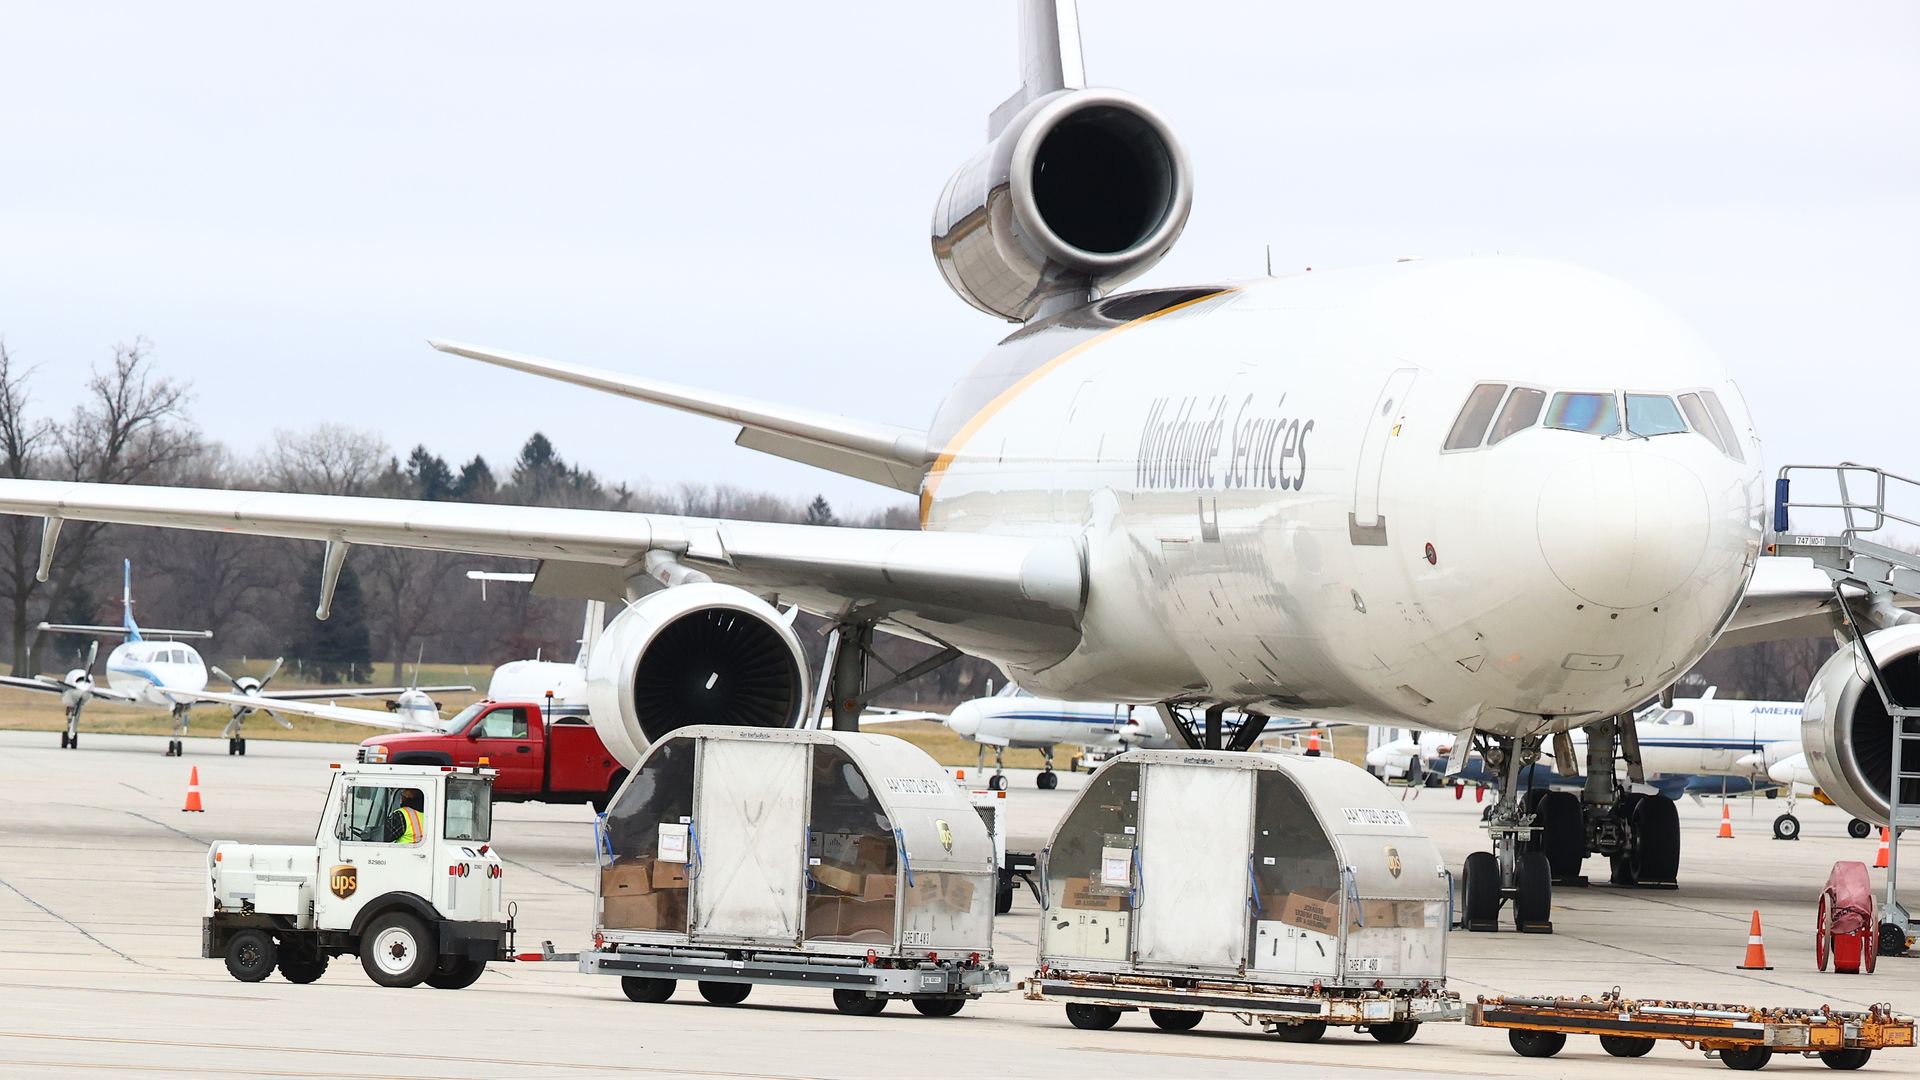 Shipments of the Pfizer And BioNTech COVID-19 vaccine are loaded into a UPS plane at the Capital Region International Airport on December 13, 2020 in Lansing, Michigan.